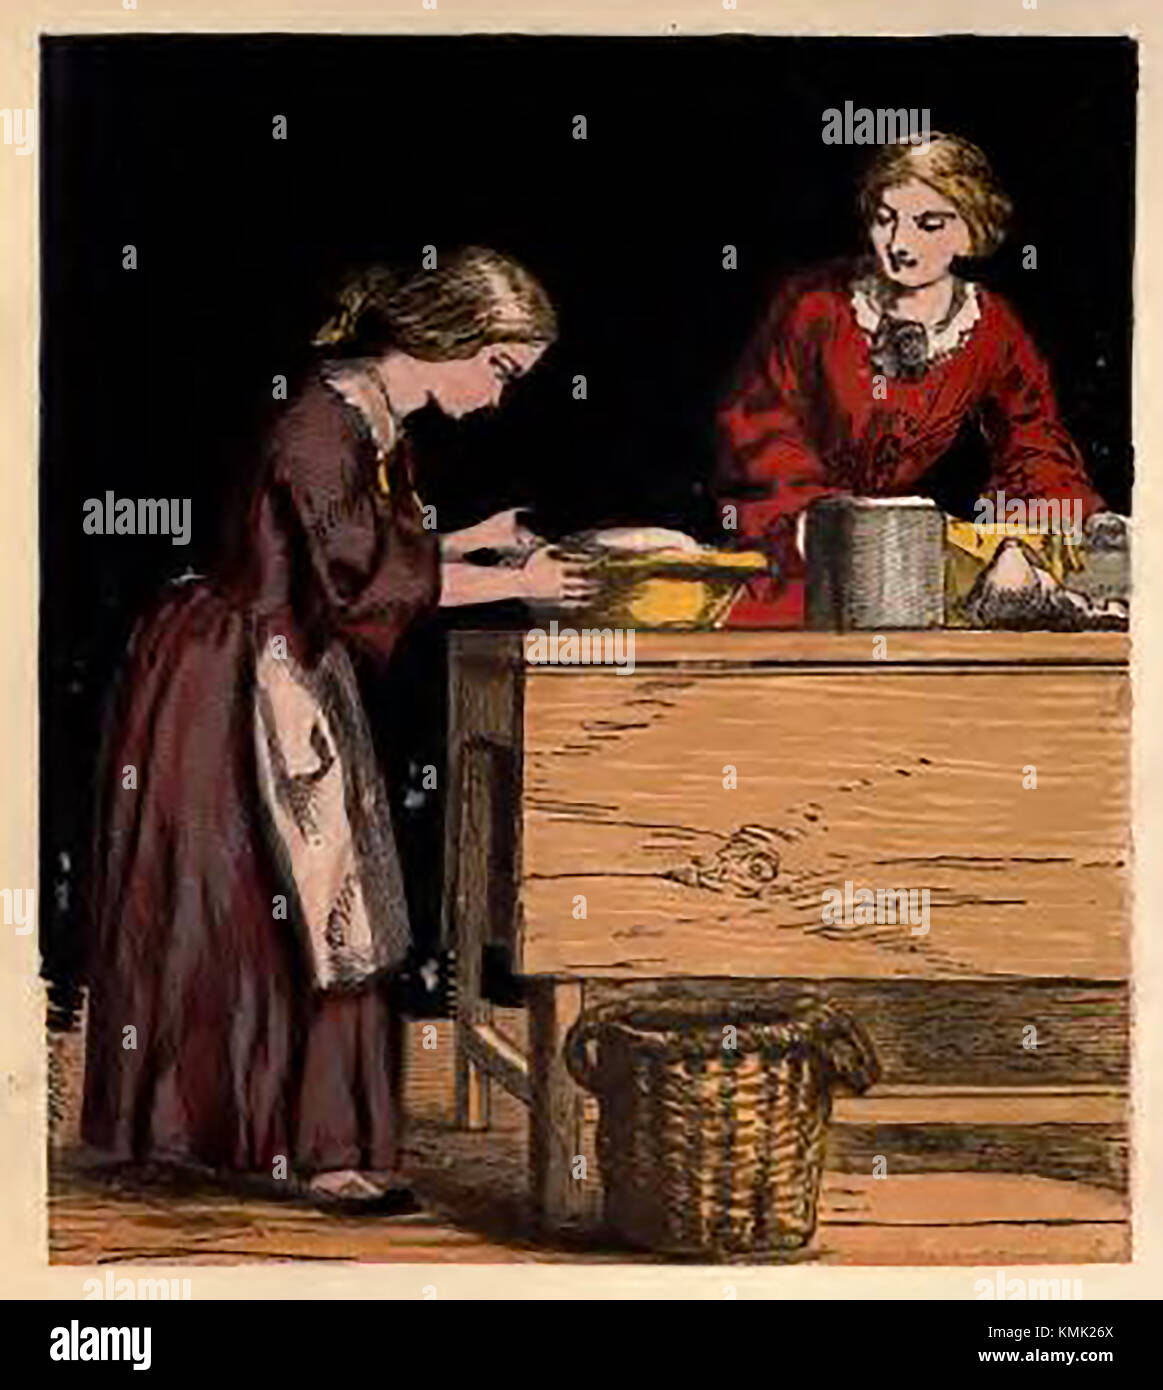 18th-century kitchen maids - Historical Cooking Classes